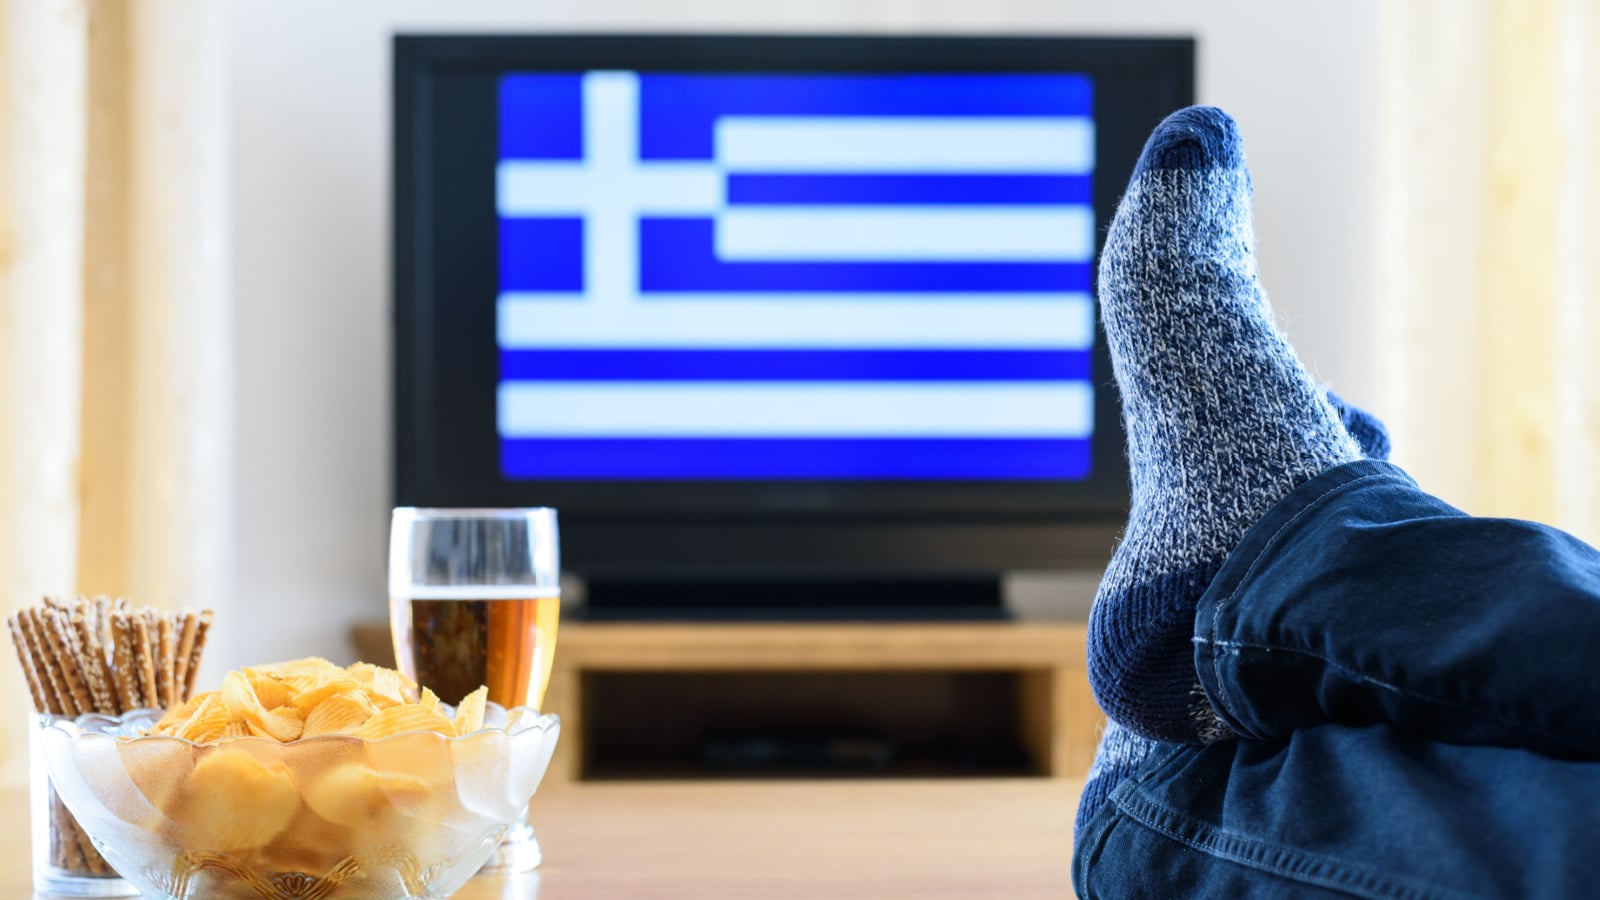 man watching Greece flag on TV screen with legs on table - stock photo